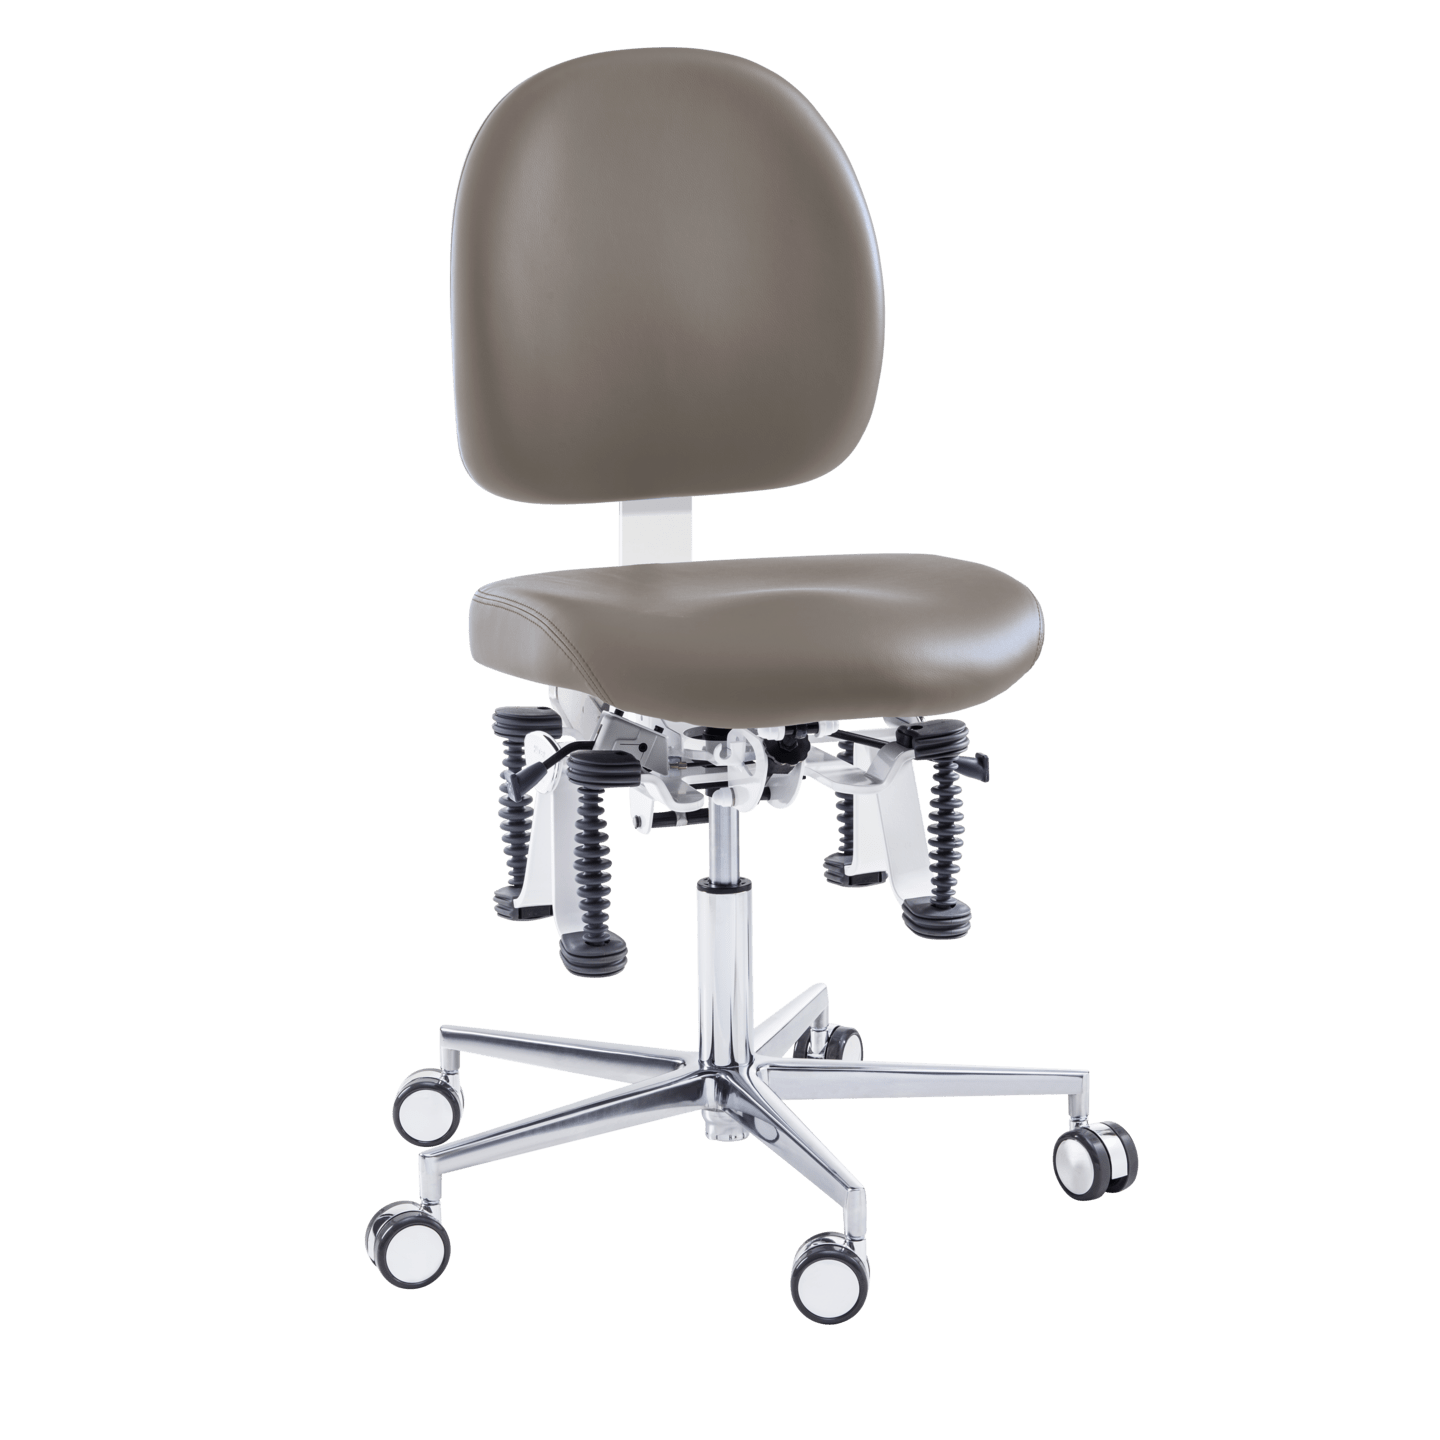 Bioswing - Bioswing Practitioner Chair in stone